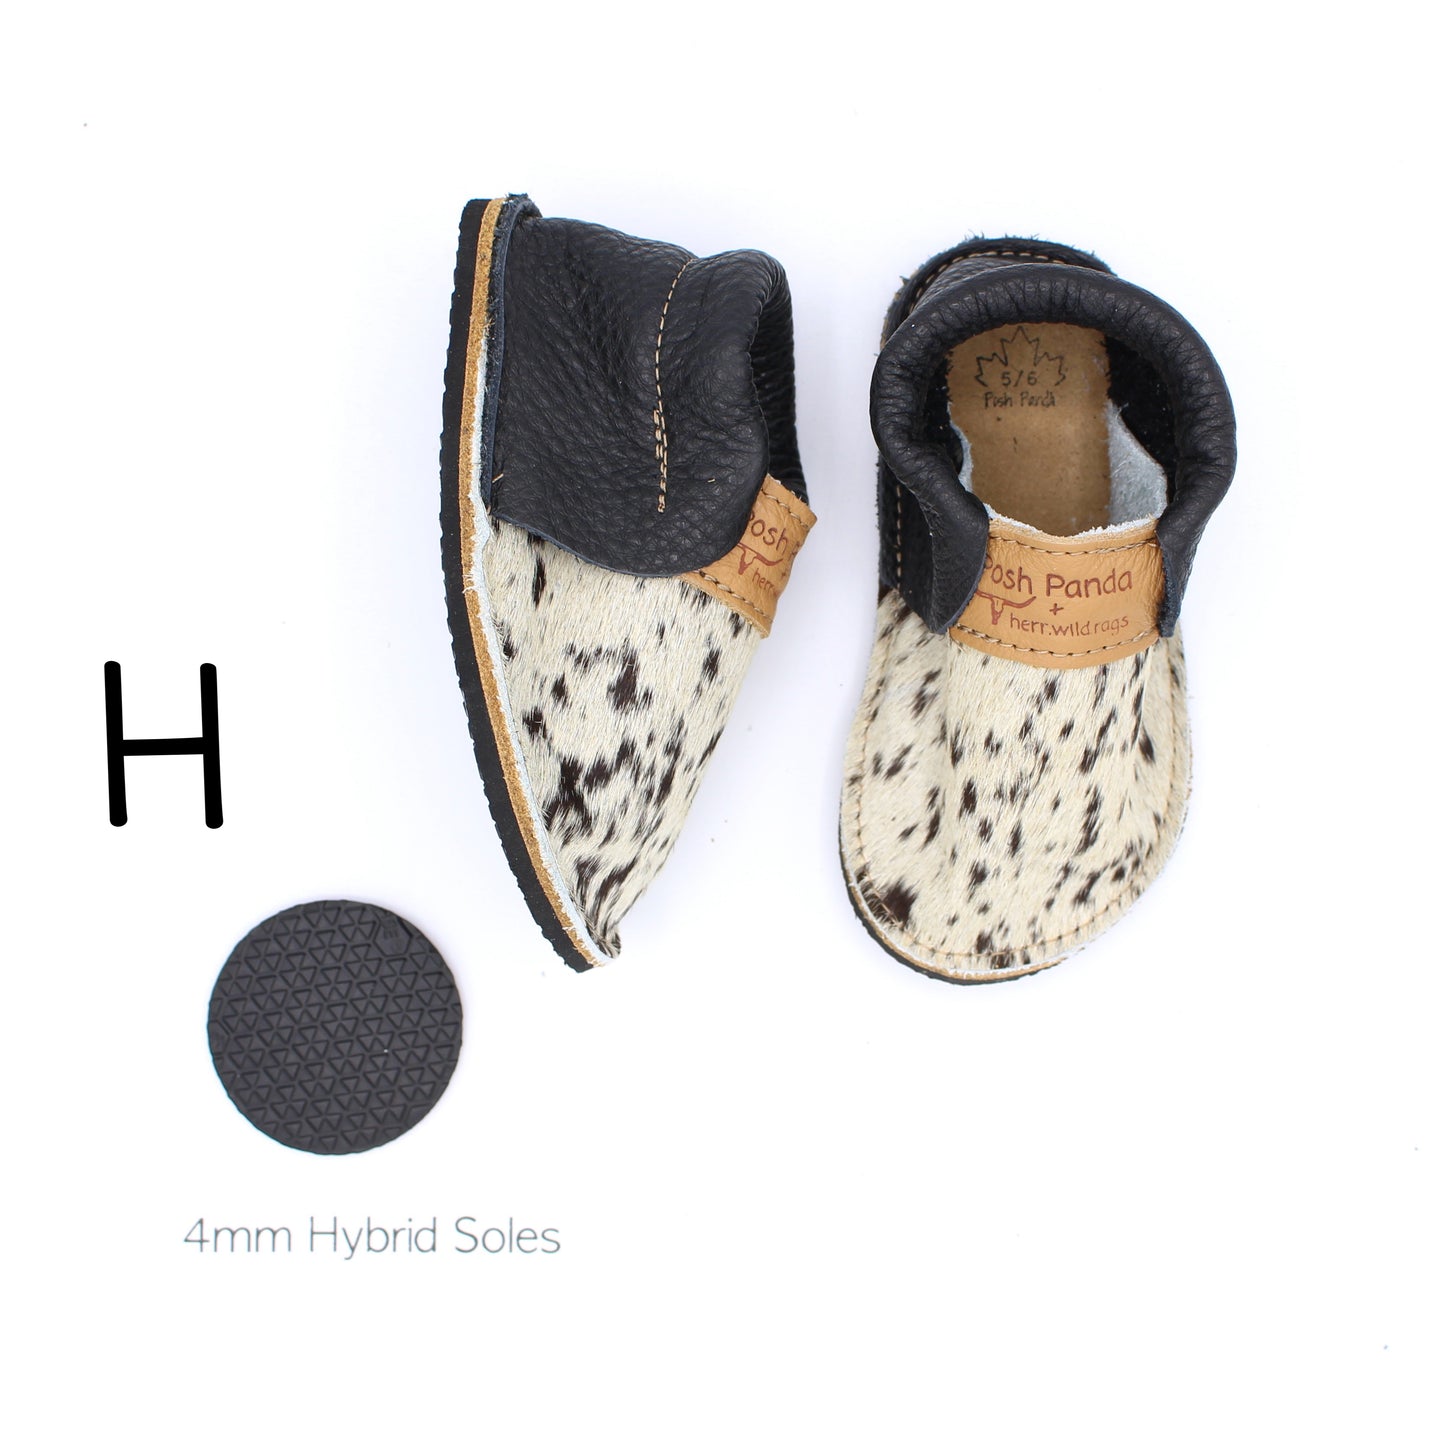 Hair Hide Mocs - TODDLER - Size 5/6 (4-6mm Sole)